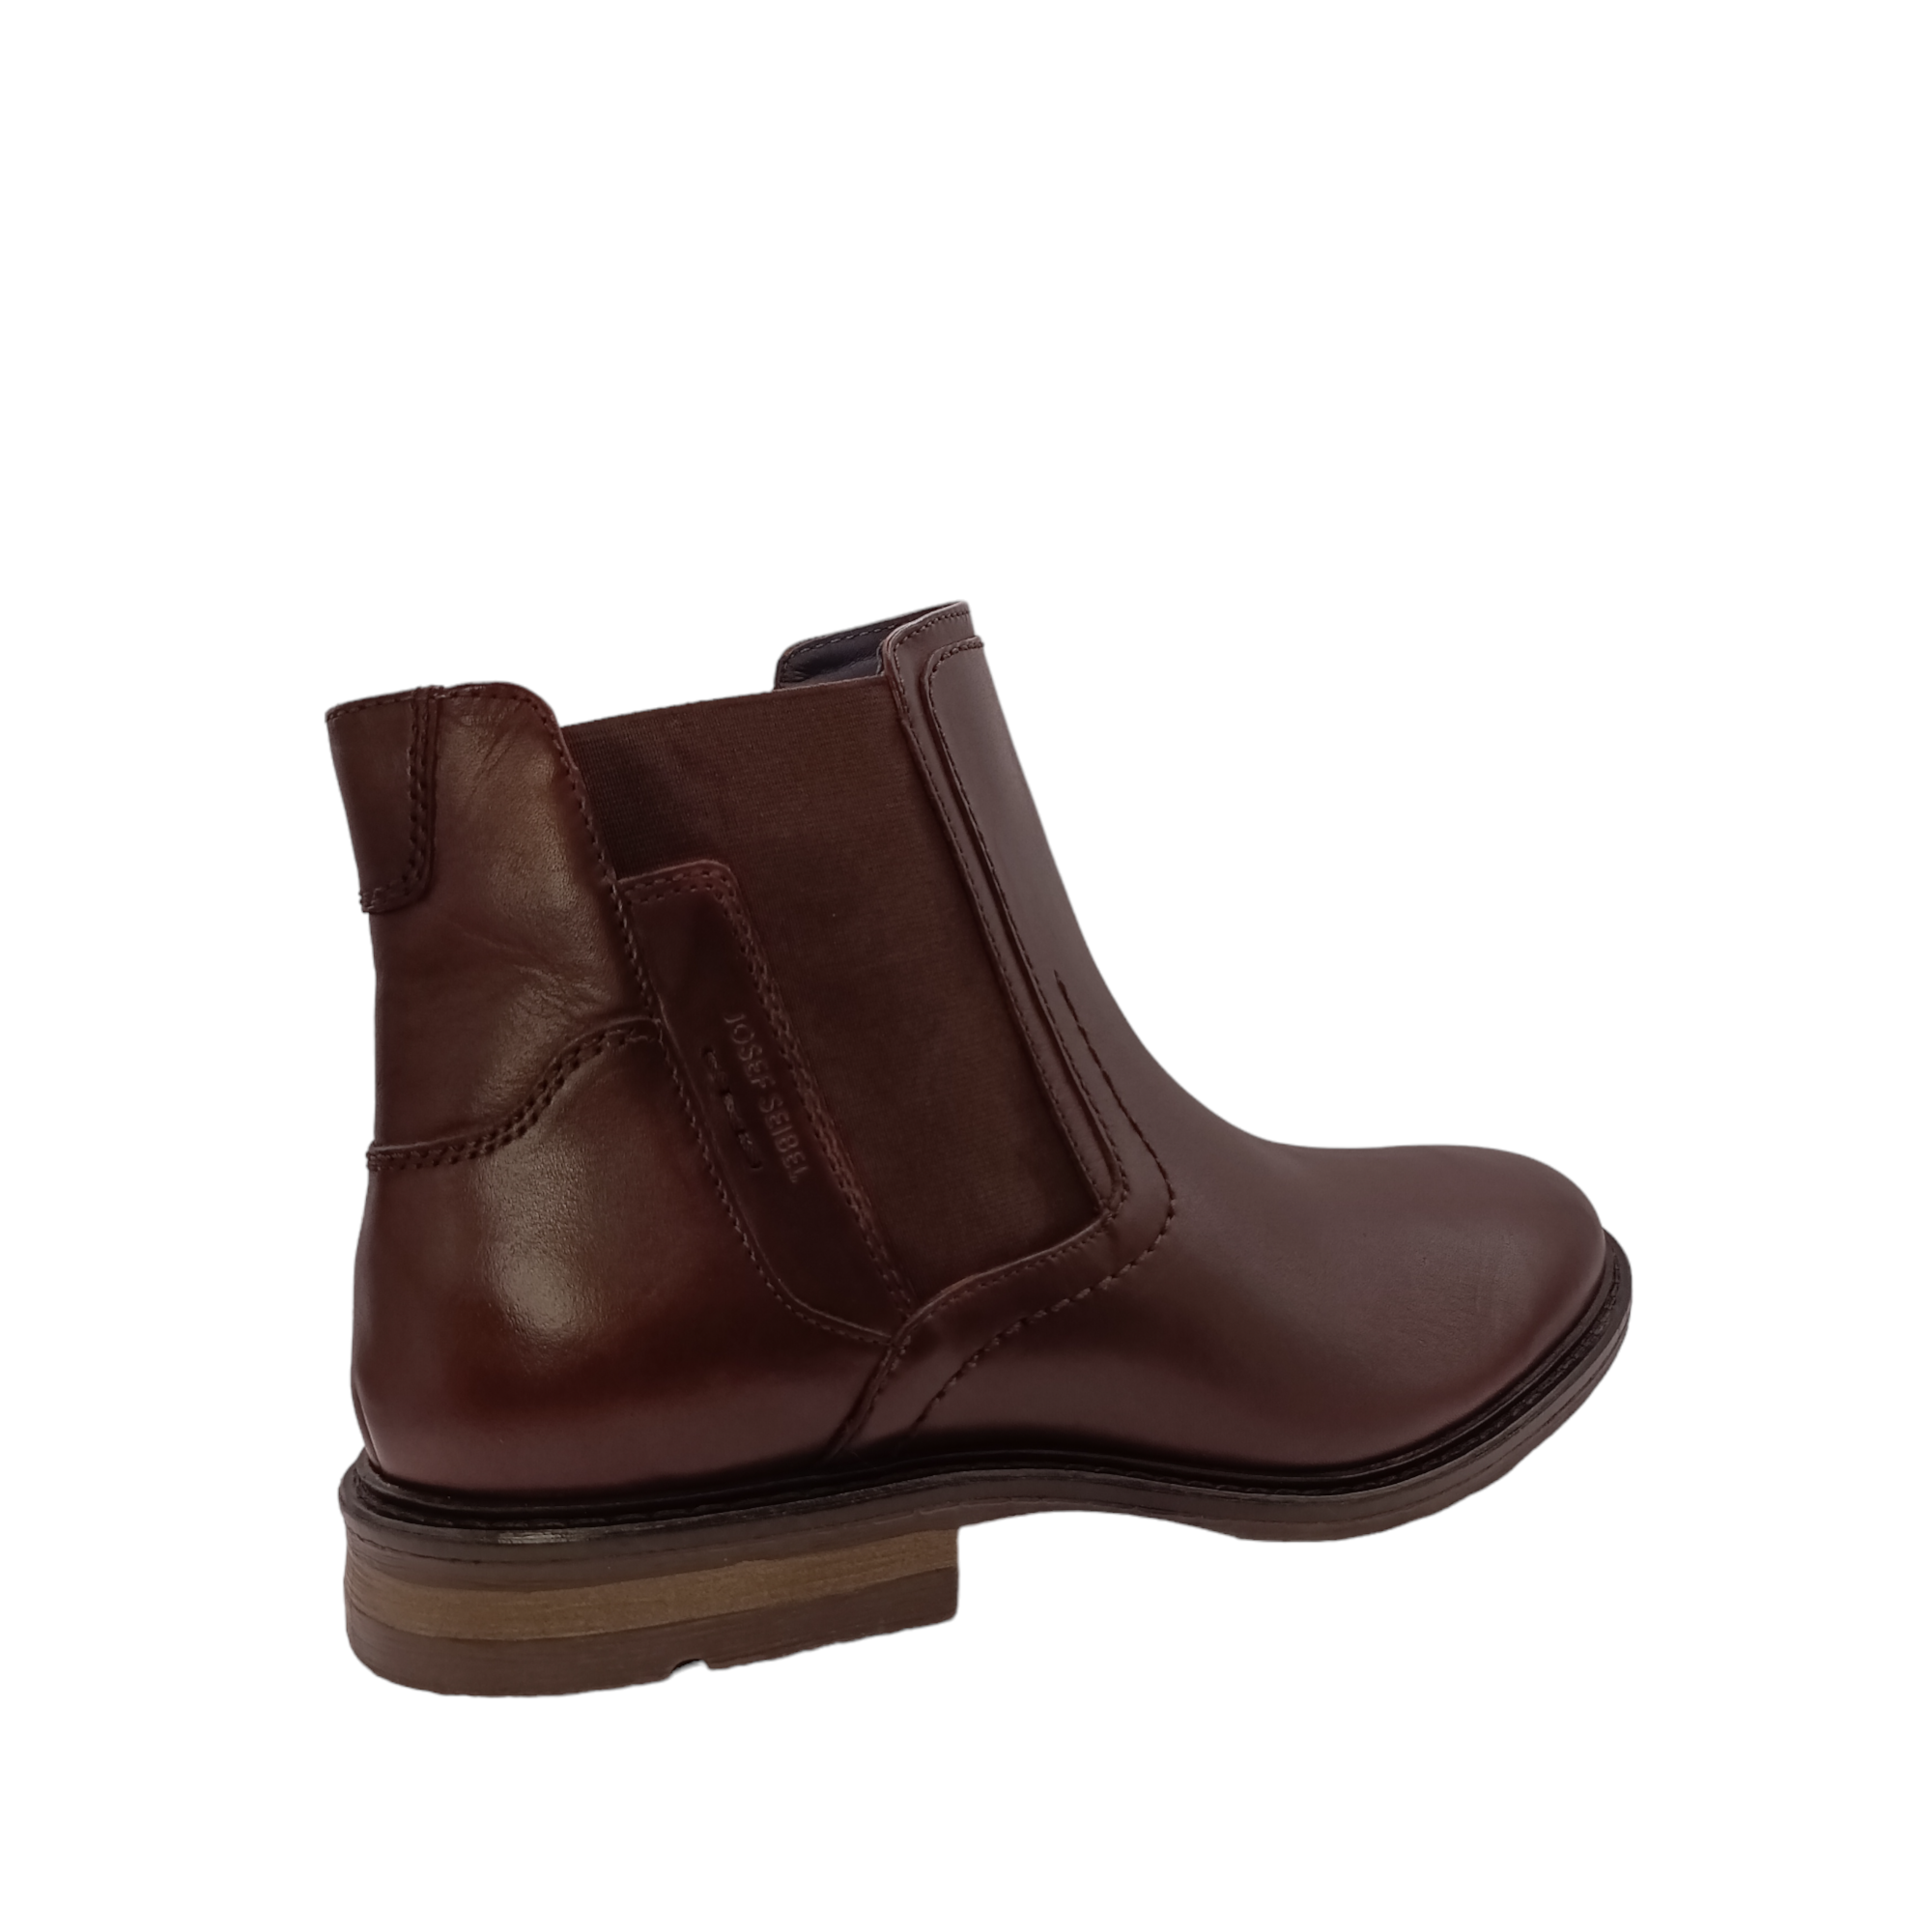 Side angle view of Earl 08 from Josef Seibel. Brown leather boot with large gusset. Shop online and instore with shoe&me